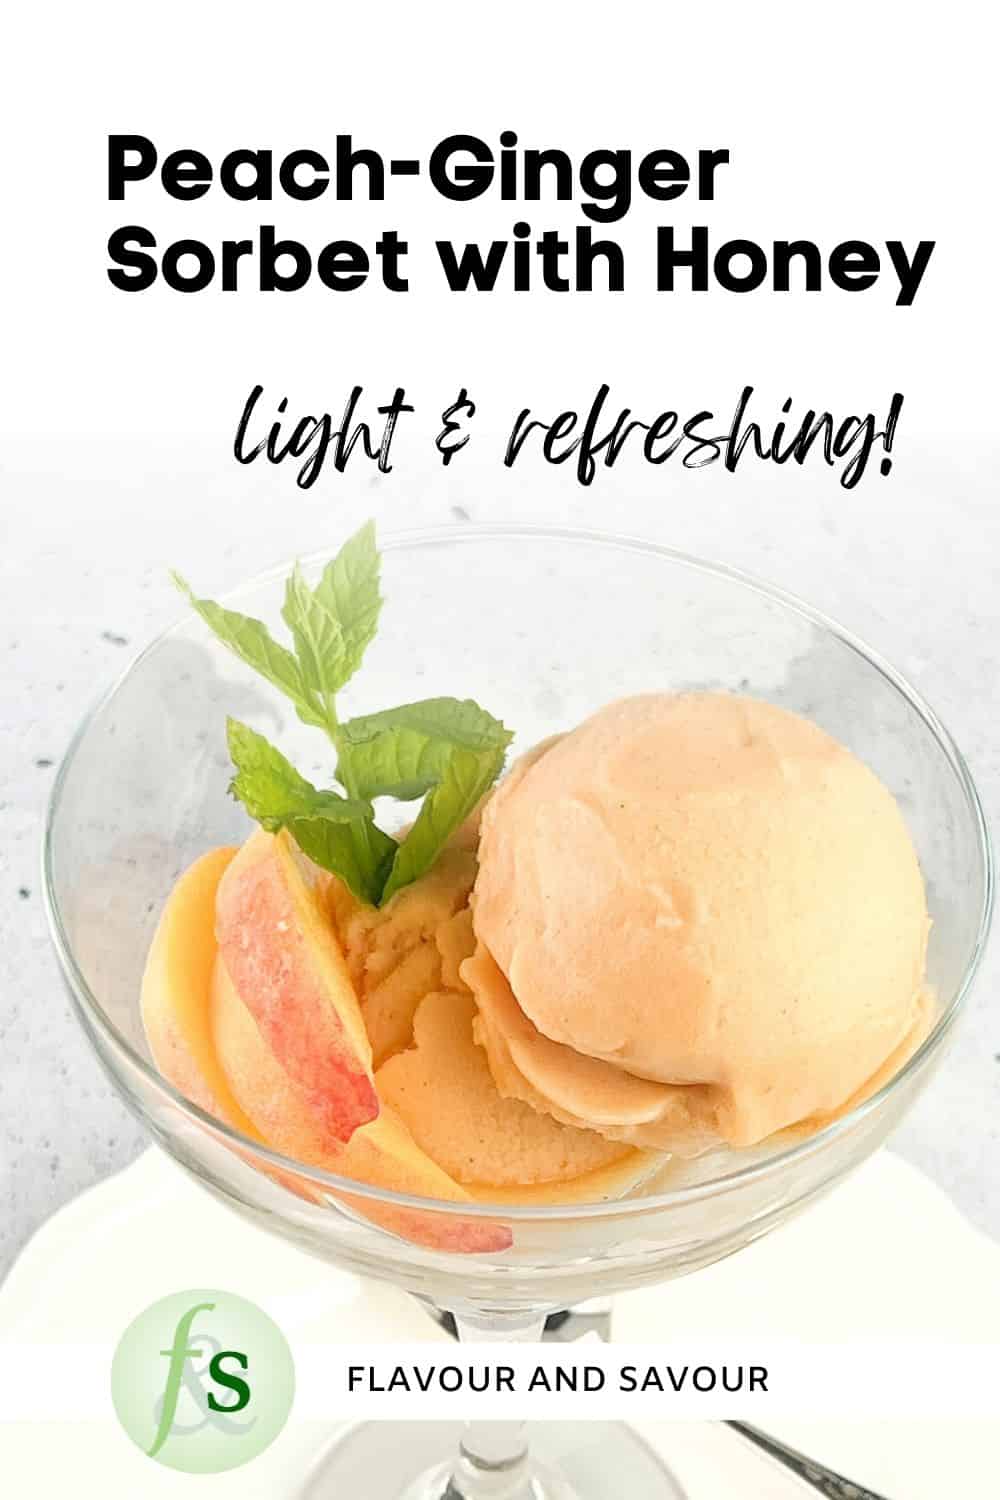 Image with text overlay for Peach-Ginger Sorbet with Honey.